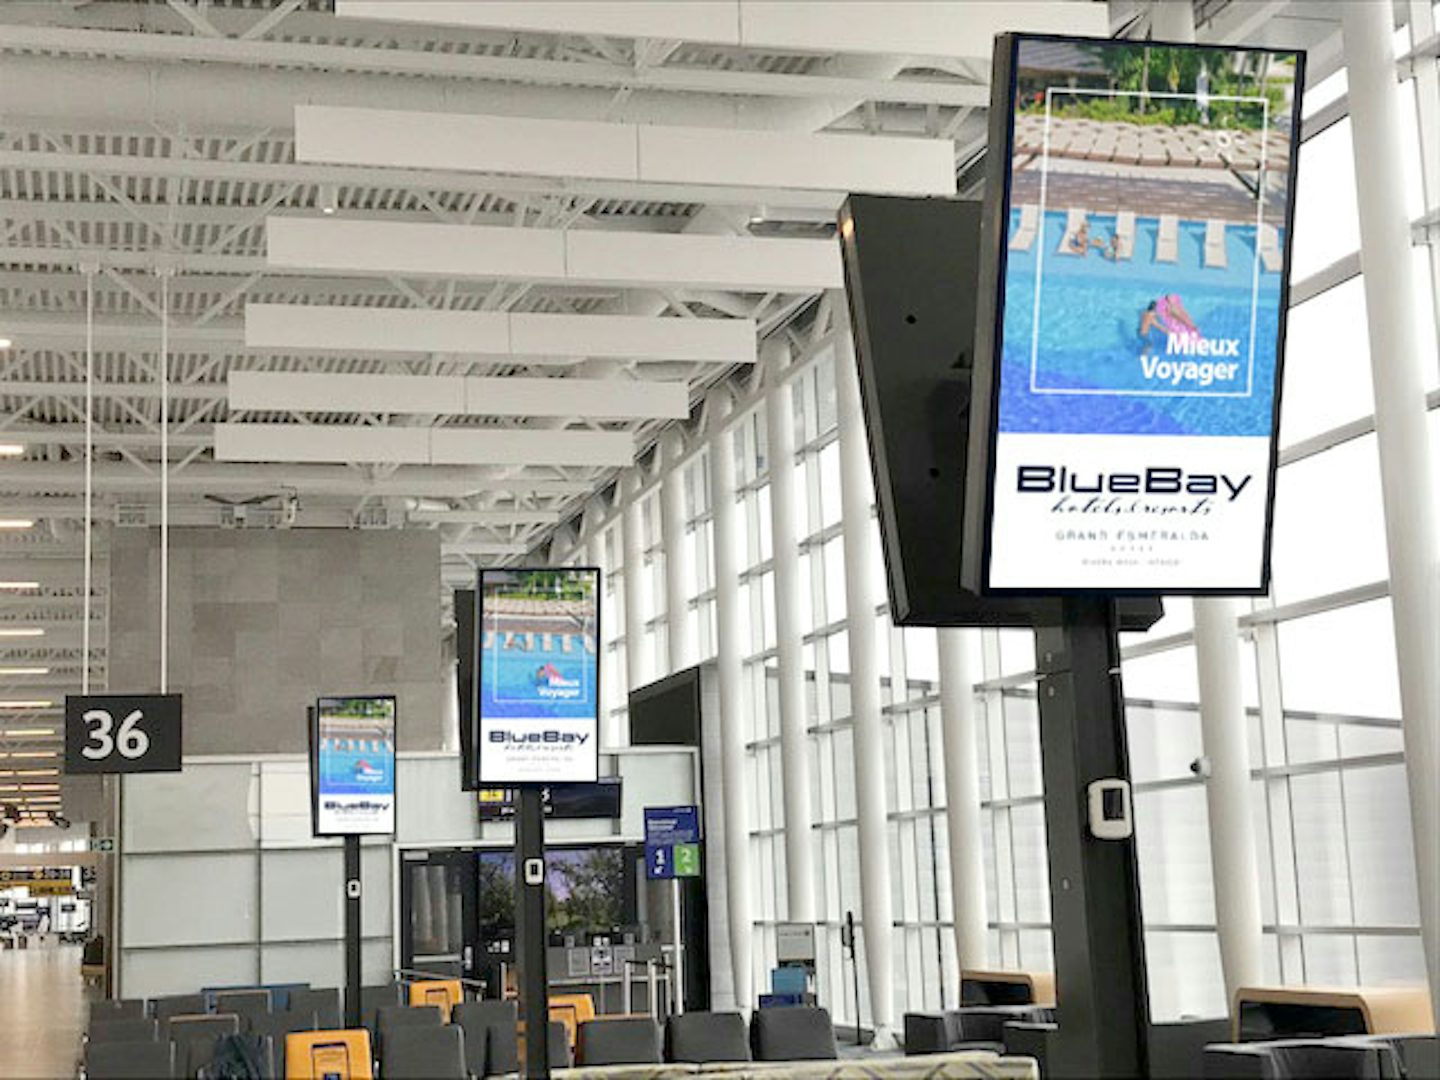 Digital Astral boards above a gate at Quebec's Jean-Lesage airport, featuring a BlueBay ad